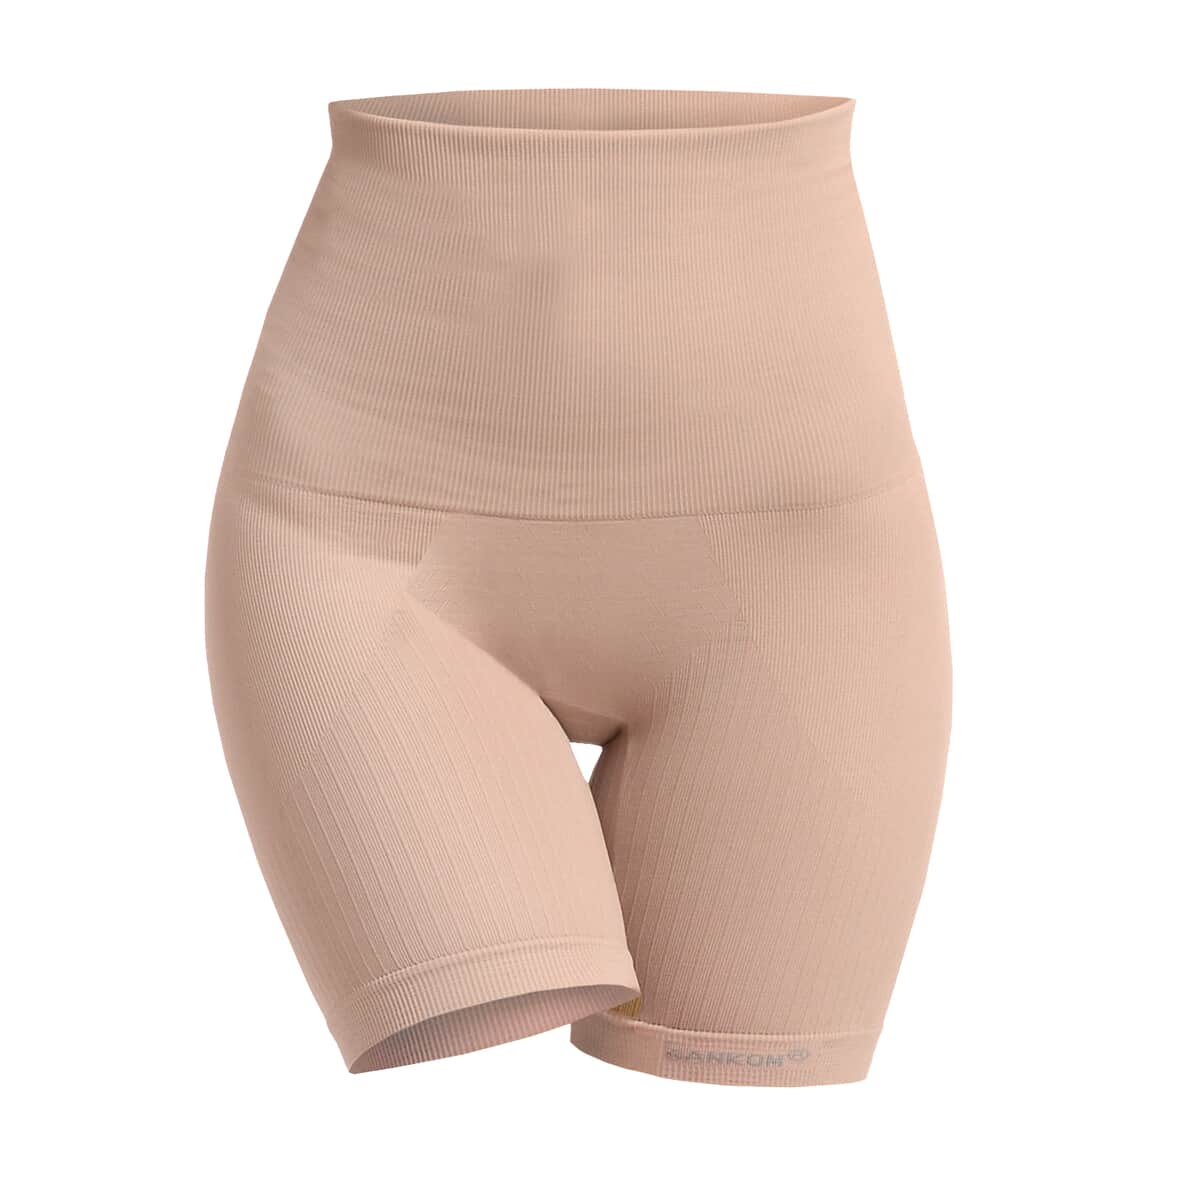 SANKOM Patent Mid-Thigh Shaper Shorts with Cooling Fibers - L/XL , Beige image number 1